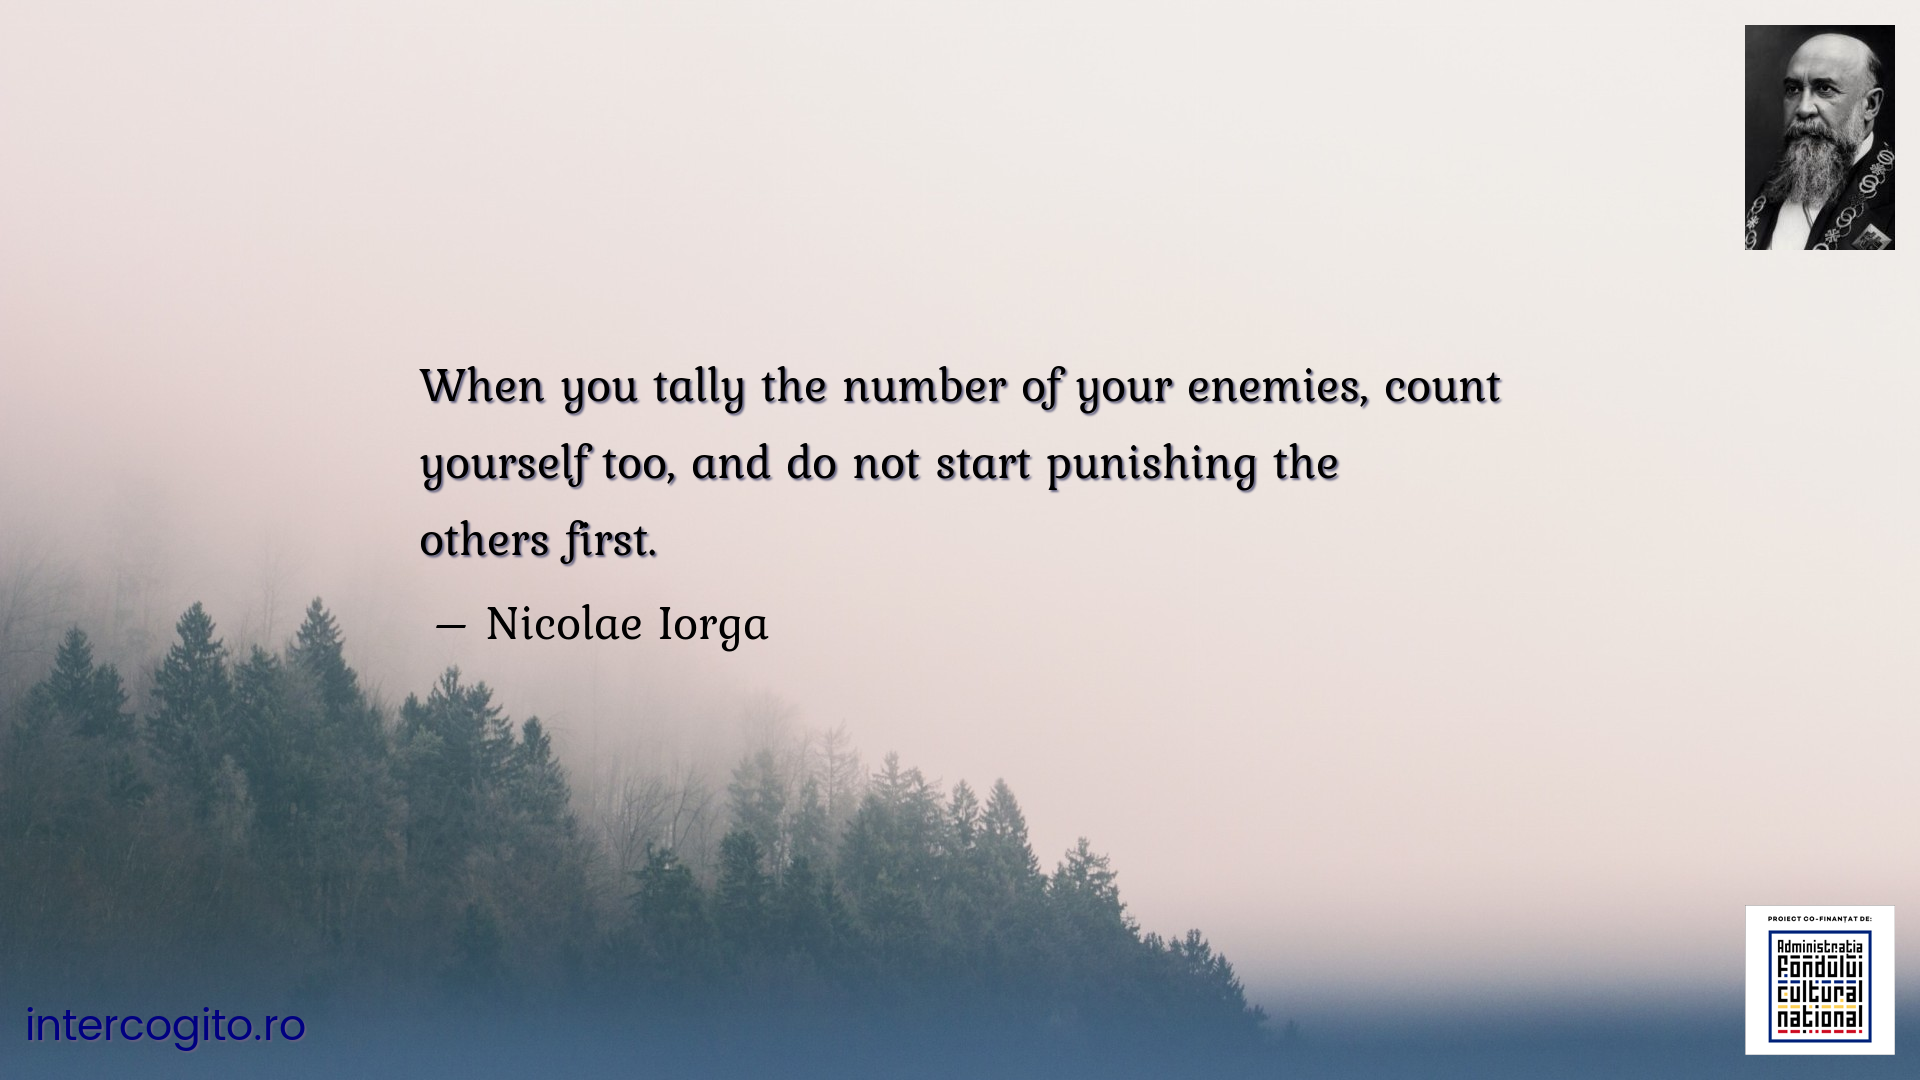 When you tally the number of your enemies, count yourself too, and do not start punishing the others first.